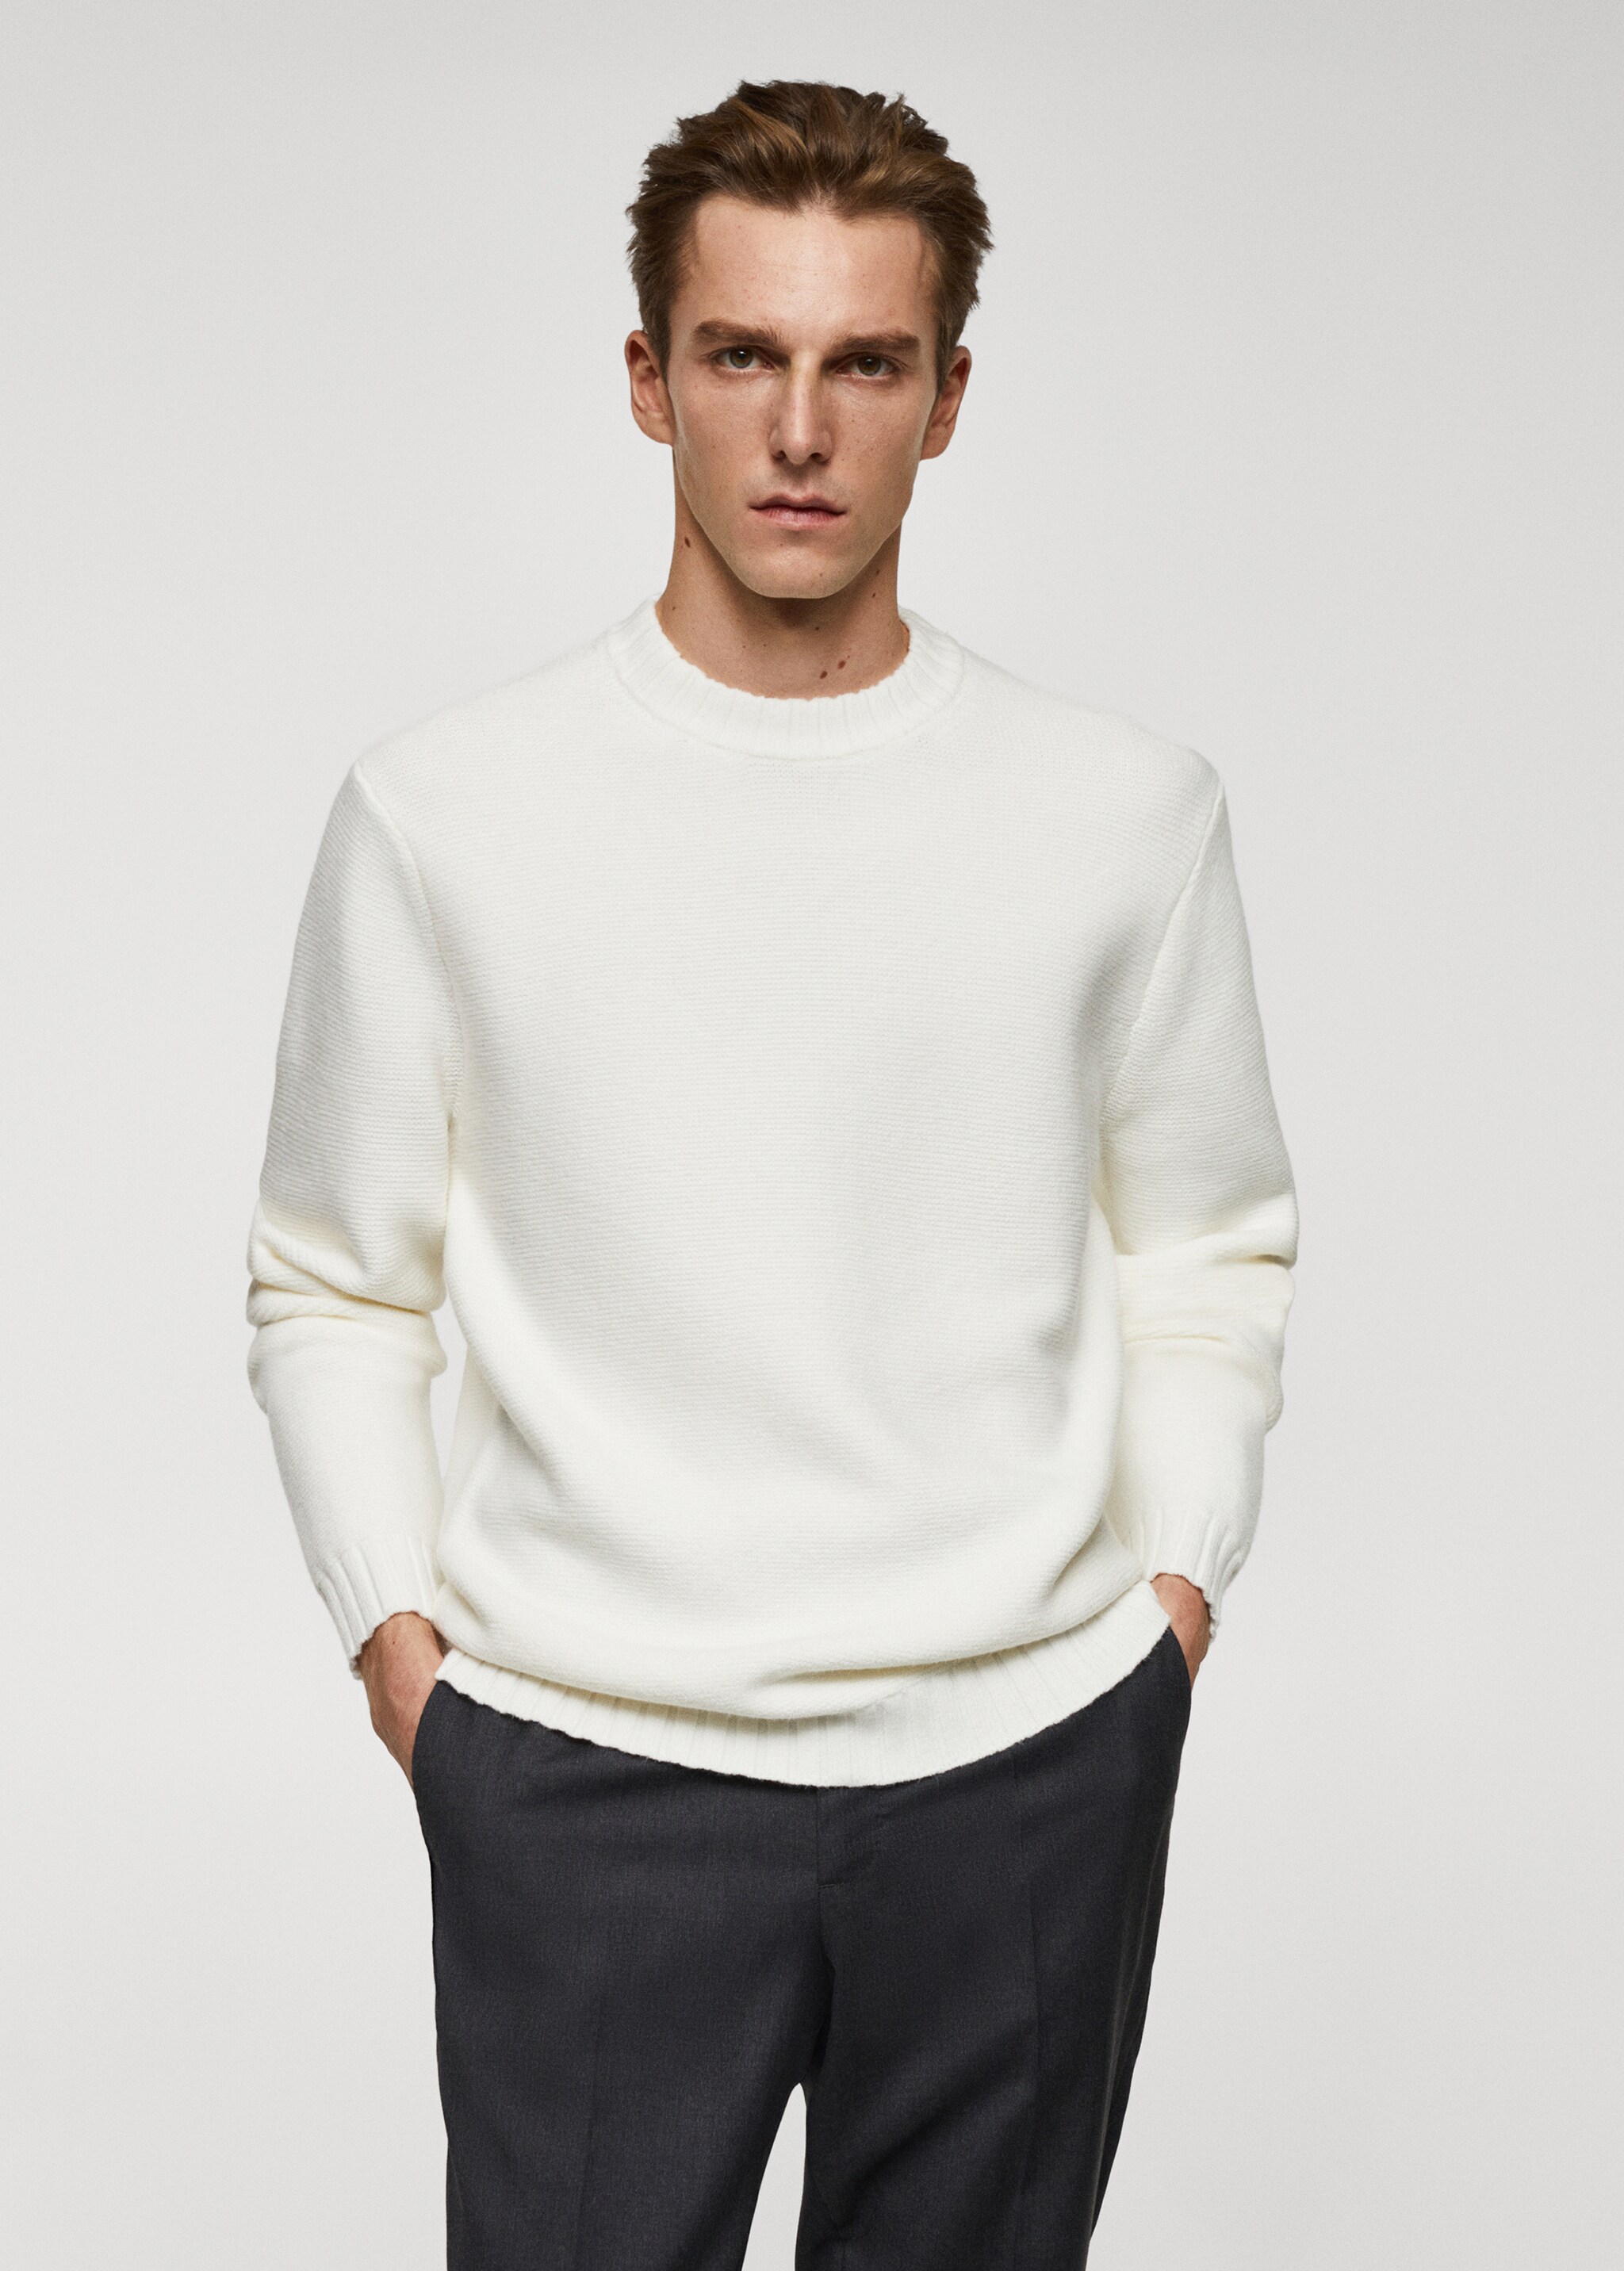 Knitted sweater with ribbed details - Medium plane